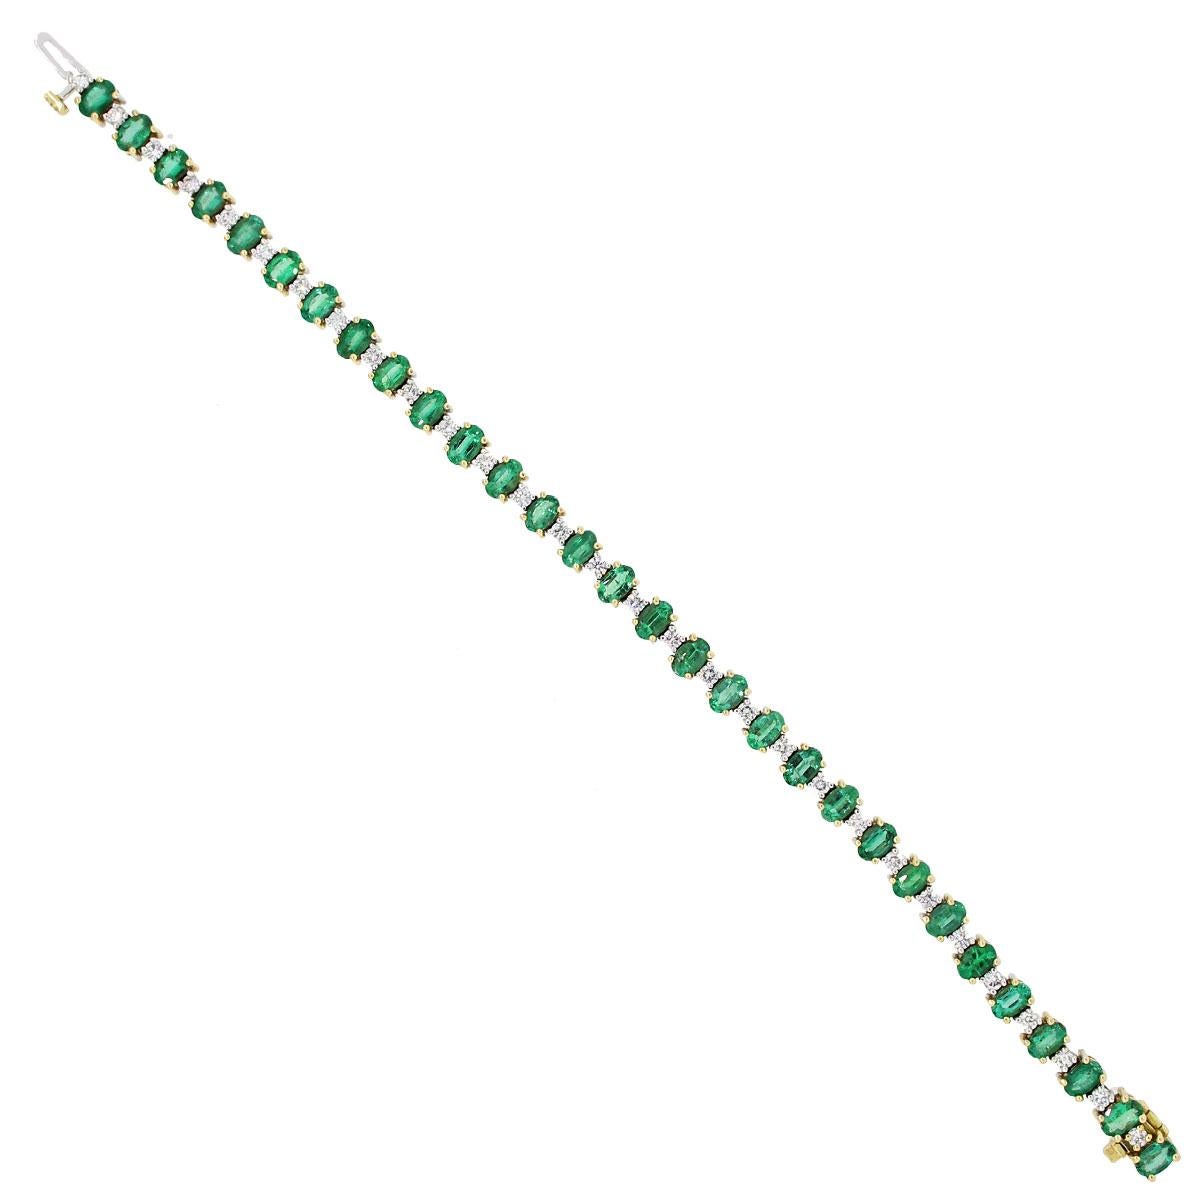 Material: 18k two tone gold
Diamond Details: Approximately 1.23 of round brilliant diamonds. Diamonds are G/H in color and VS in clarity.
Gemstone Details: Approximately 6.79 of oval cut Emerald gemstones
Clasp: Tongue in box clasp
Measurements: